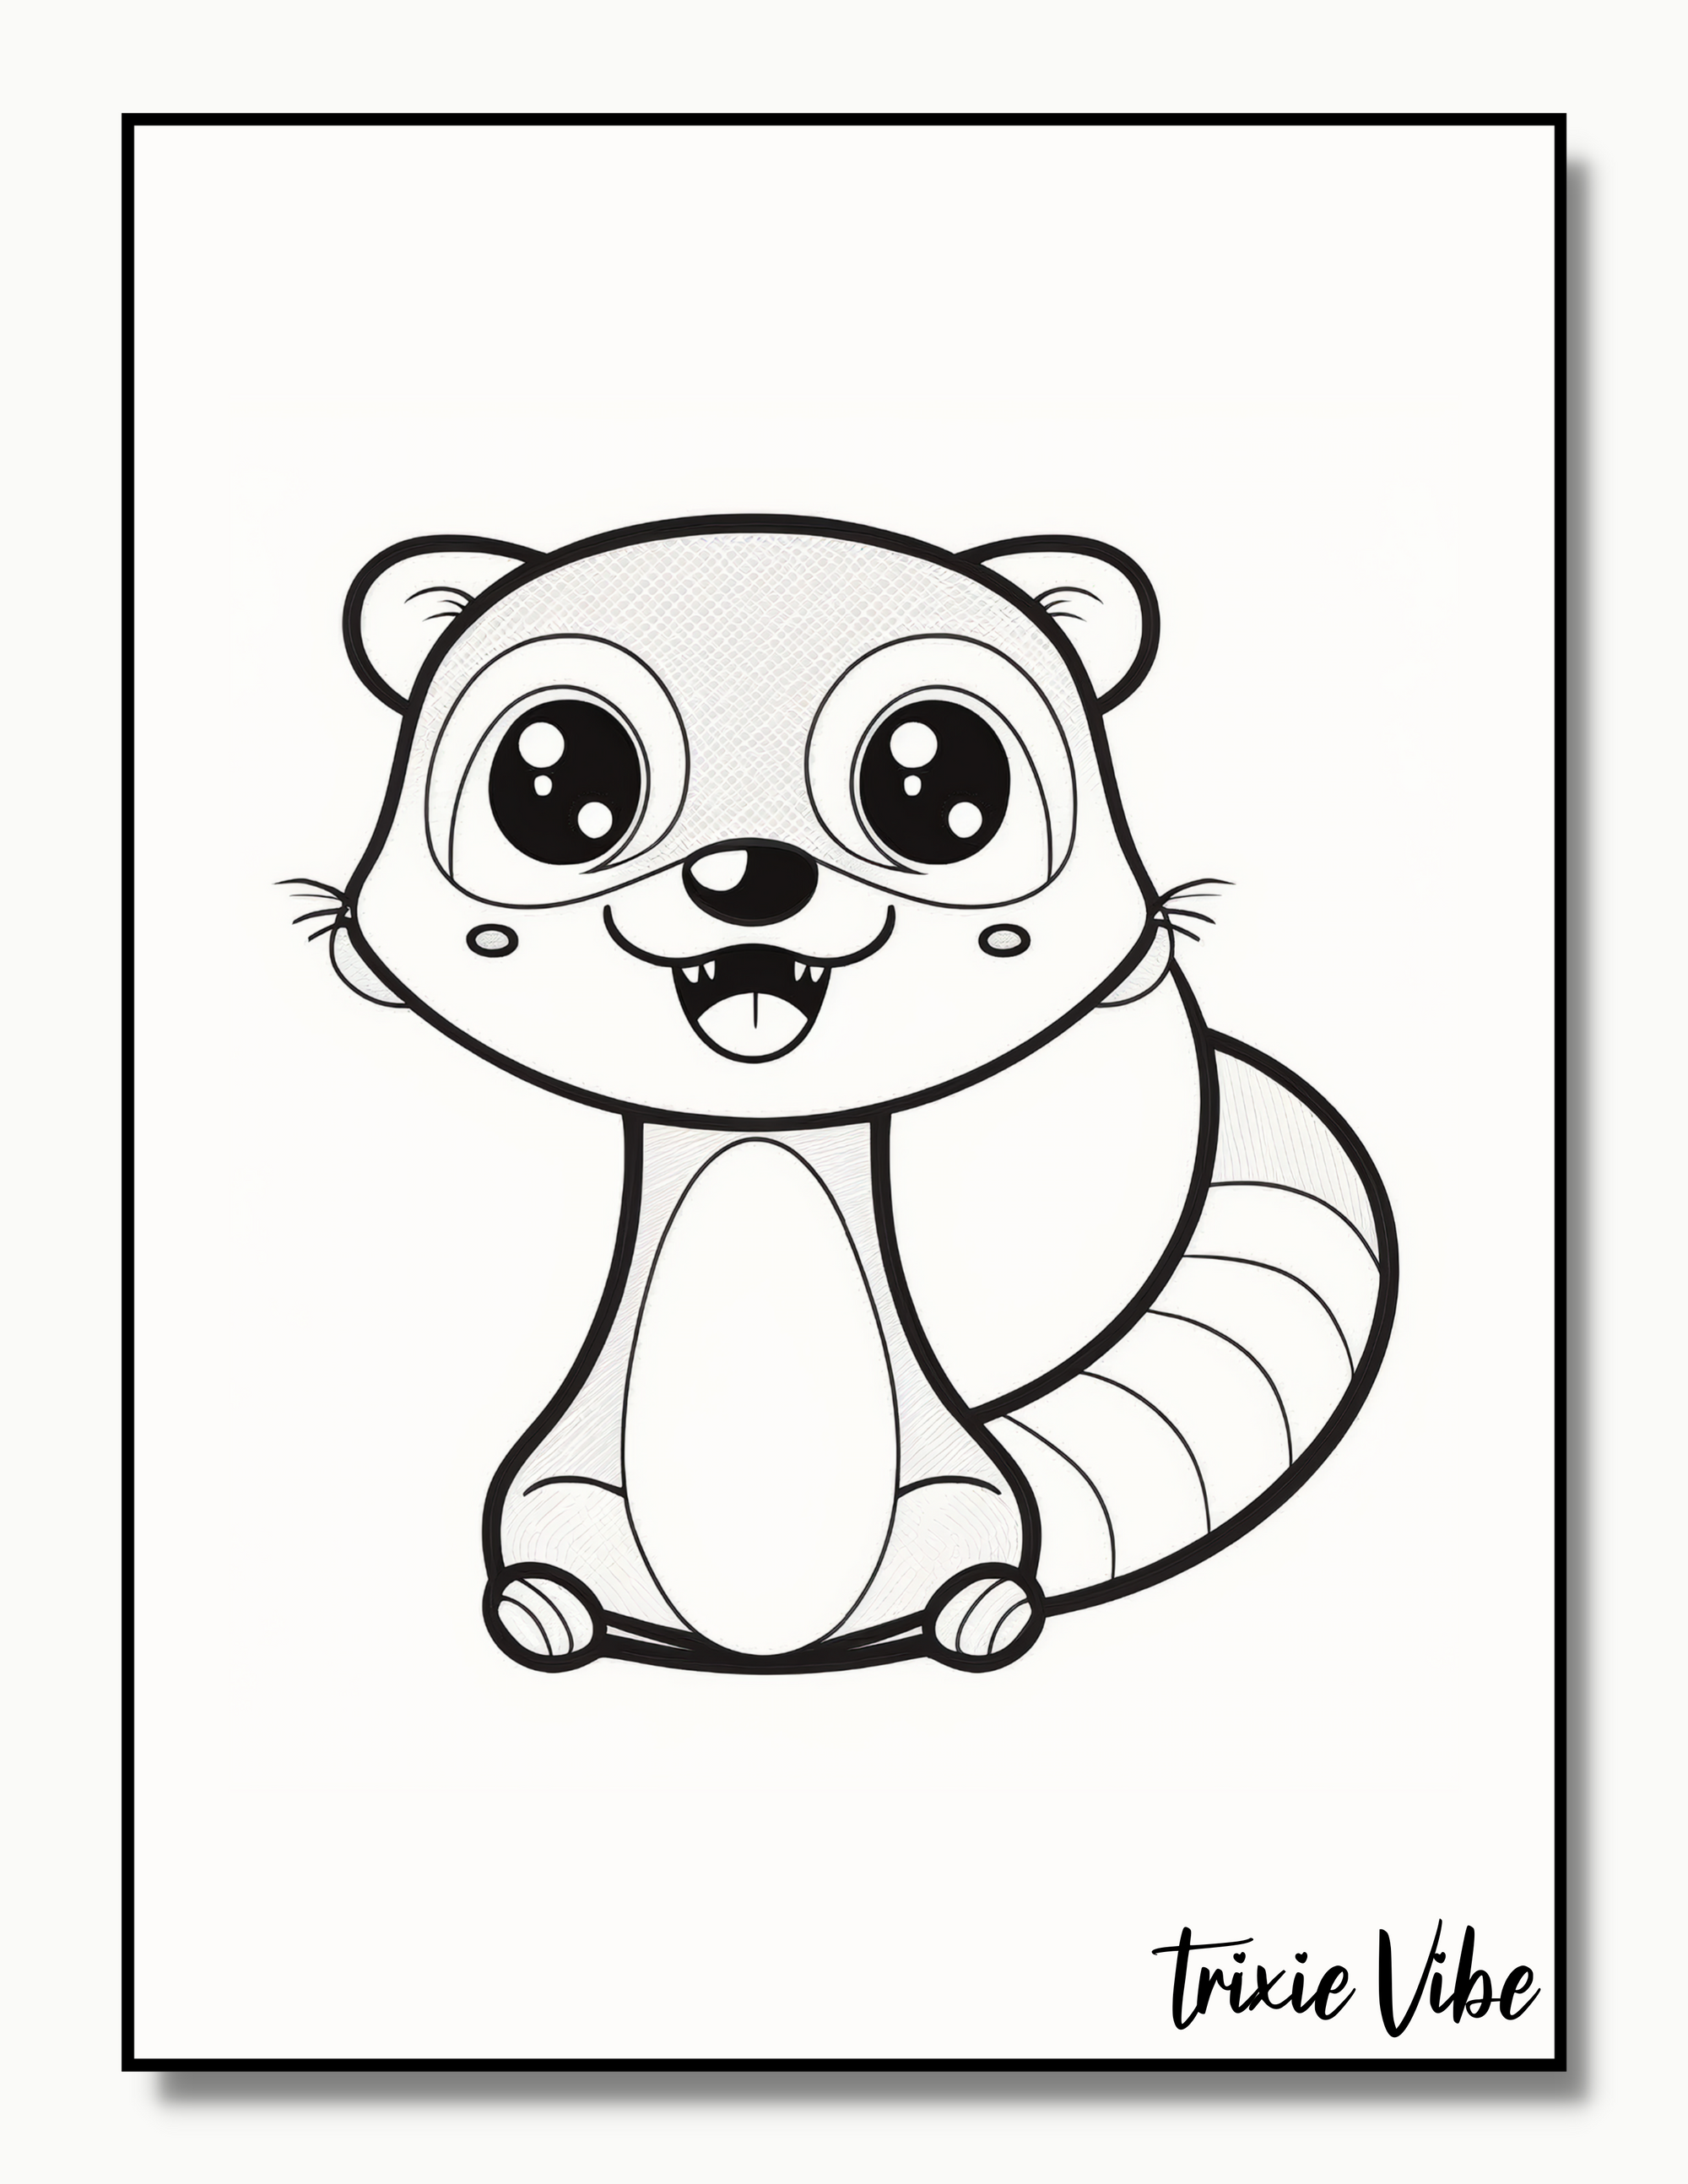 Ferret Coloring Pages for Kids